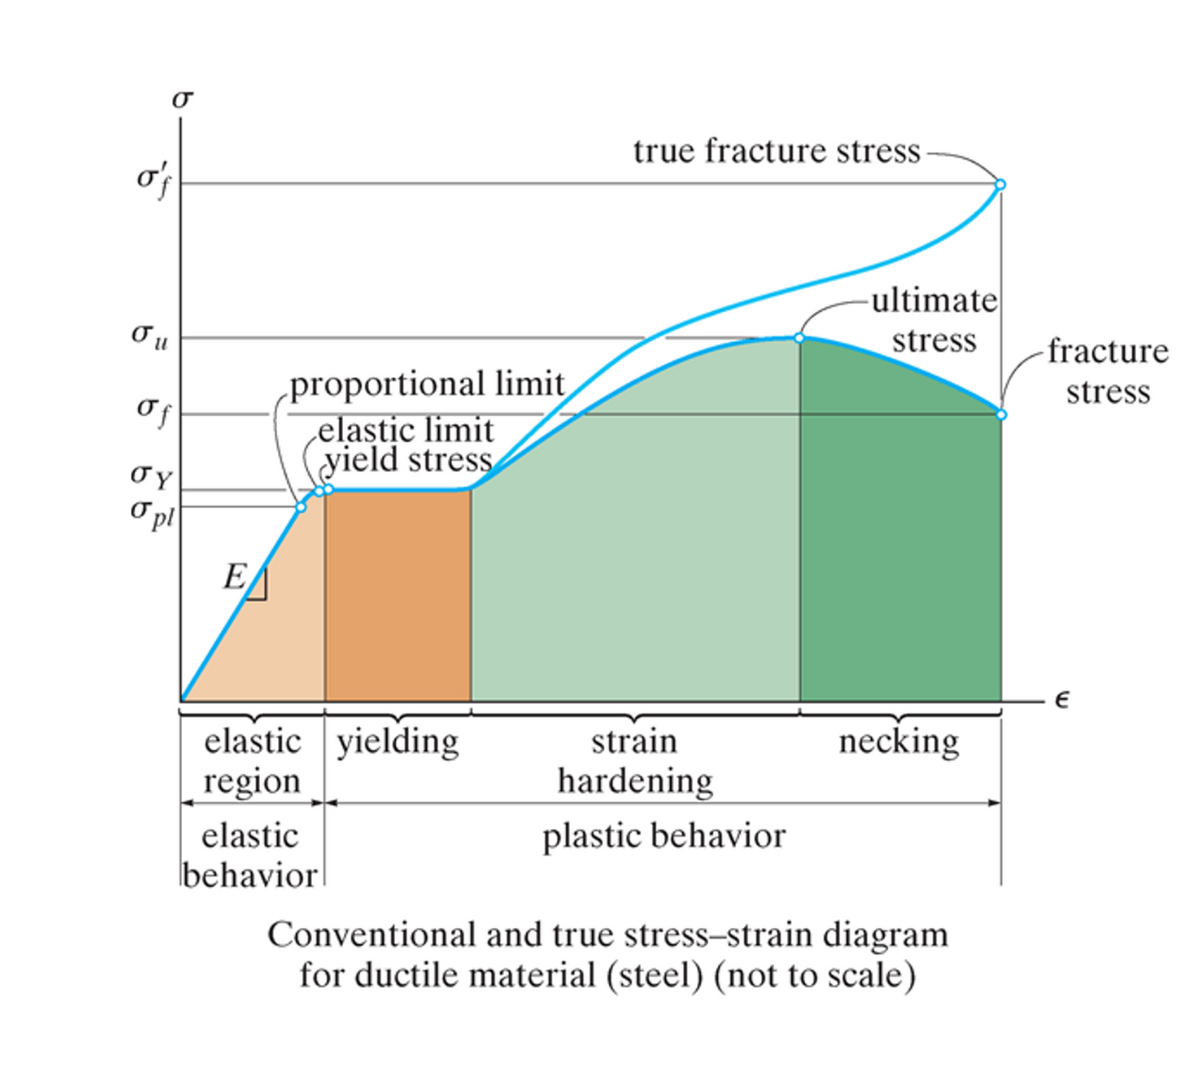 b
o'f
σu
of
σY
o pl
E
proportional limit
elastic limit
yield stress
elastic yielding
region
elastic
behavior
true fracture stress-
strain
hardening
plastic behavior
ultimate
stress
necking
Conventional and true stress-strain diagram
for ductile material (steel) (not to scale)
fracture
stress
E